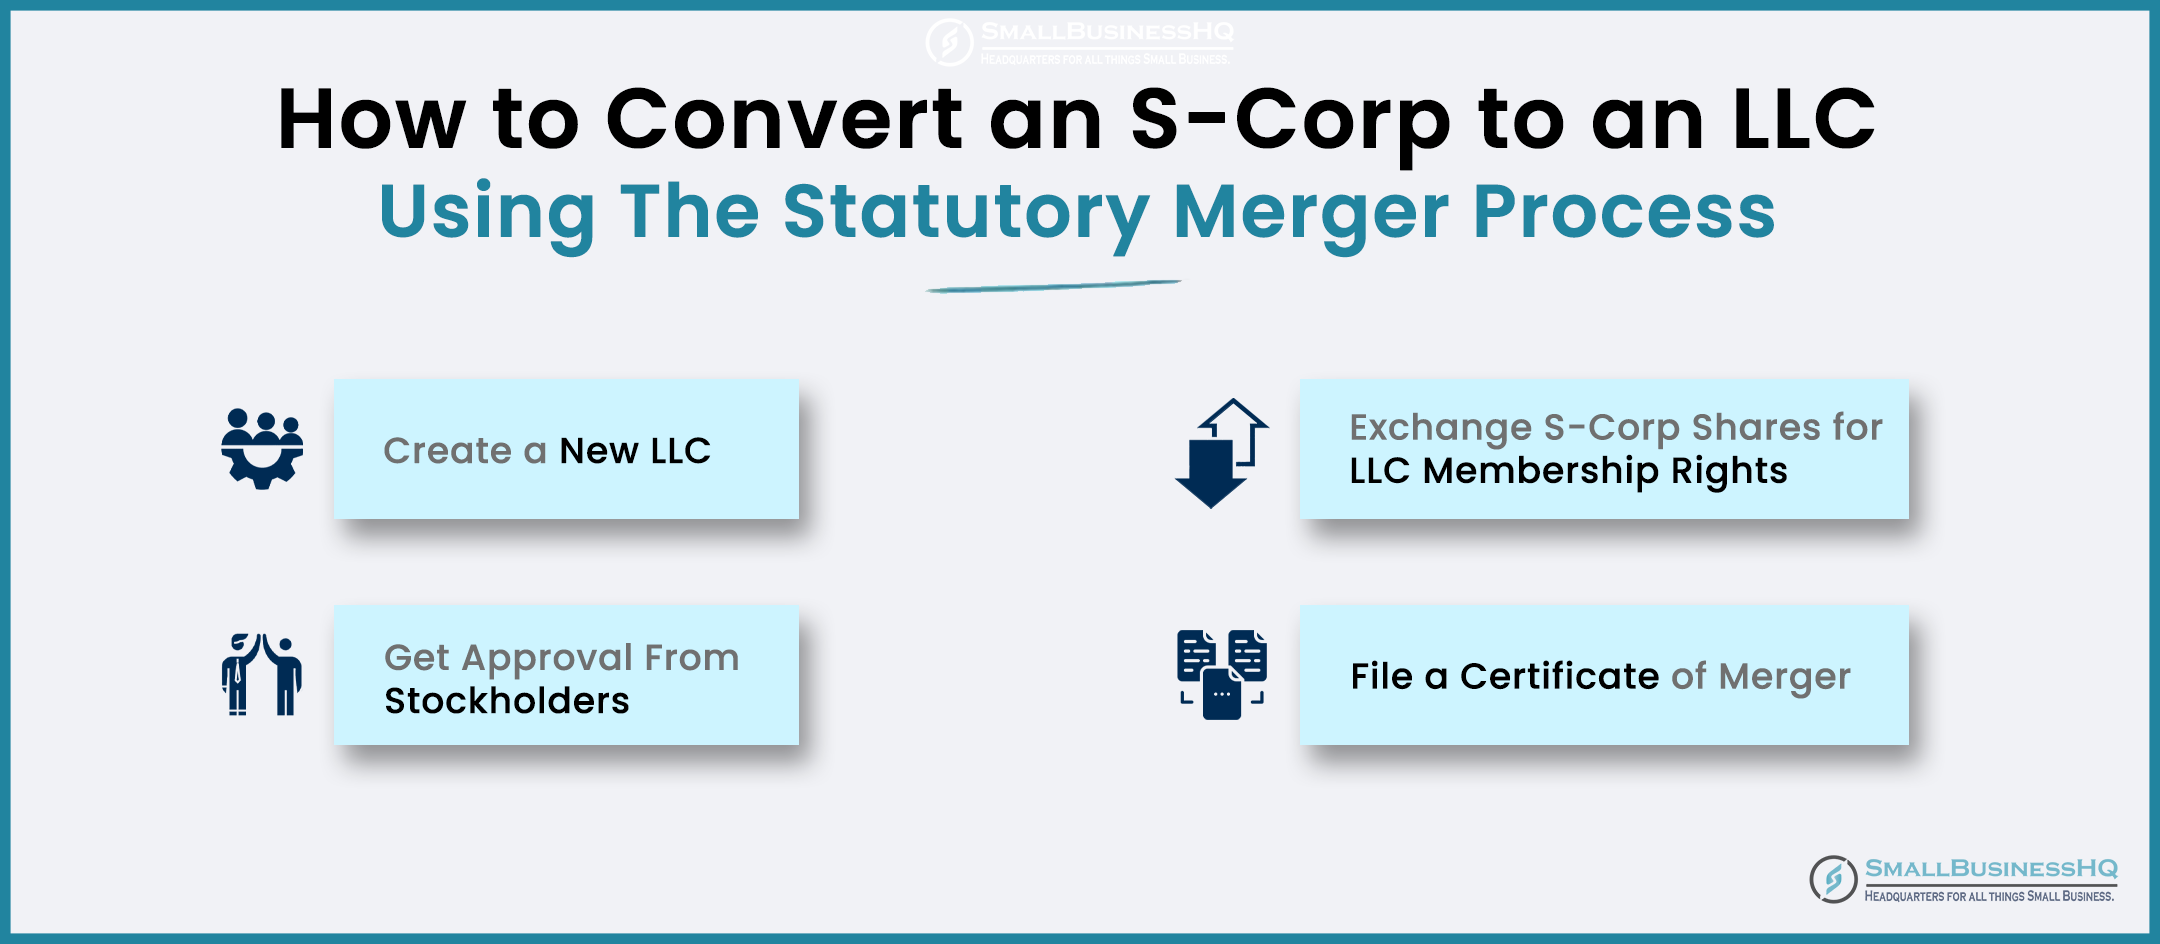 How to Convert an S-Corp